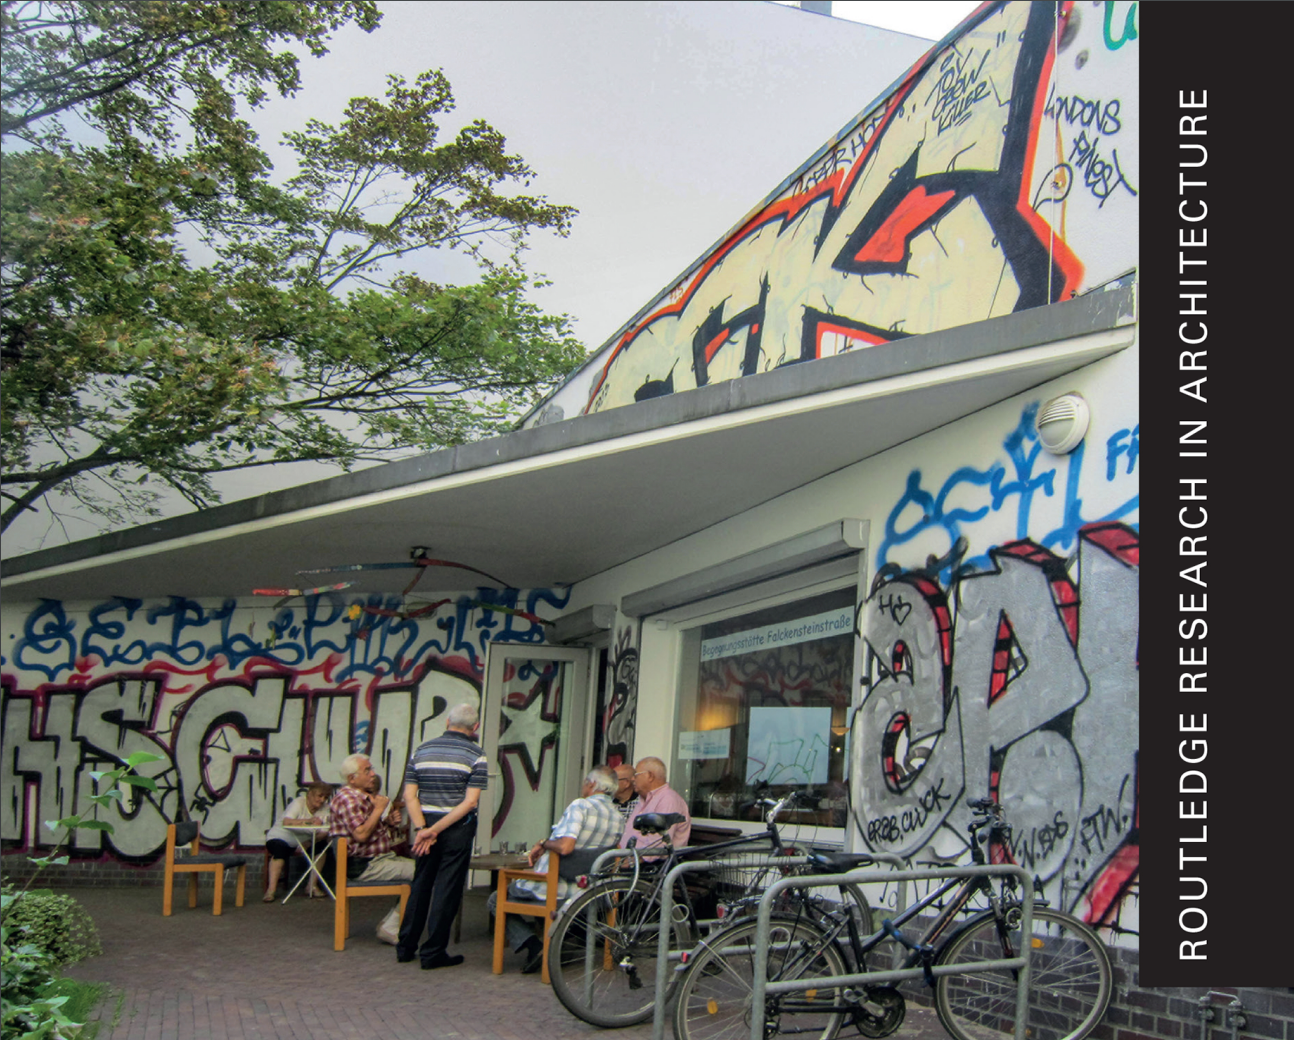 Men and bikes outside a graffiti covered building